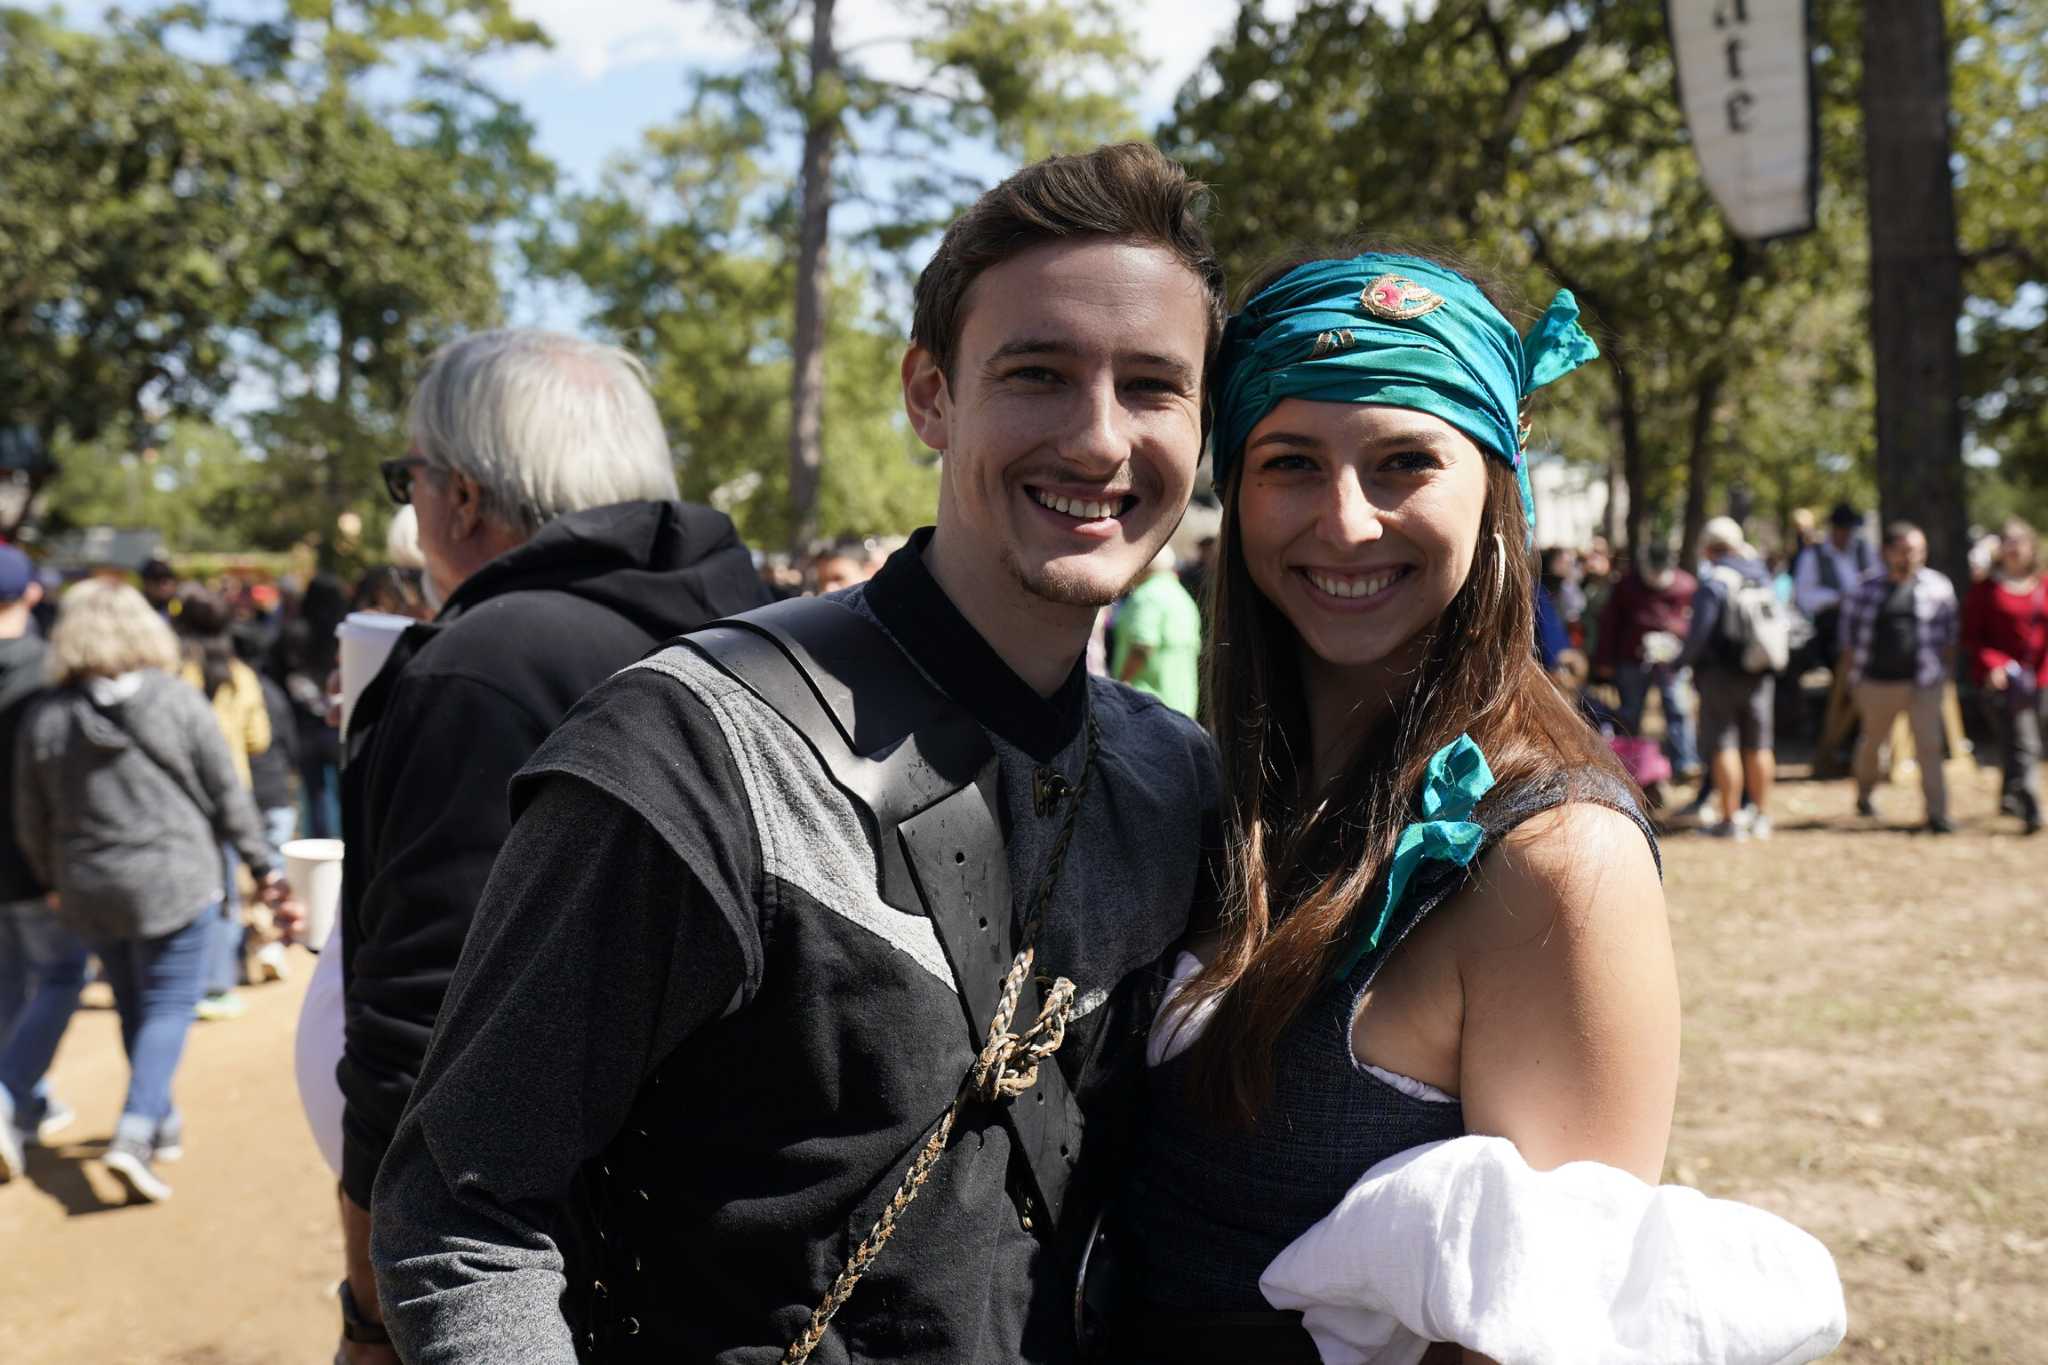 Bold costumes help ring in second week of 2019 Texas Renaissance Festival